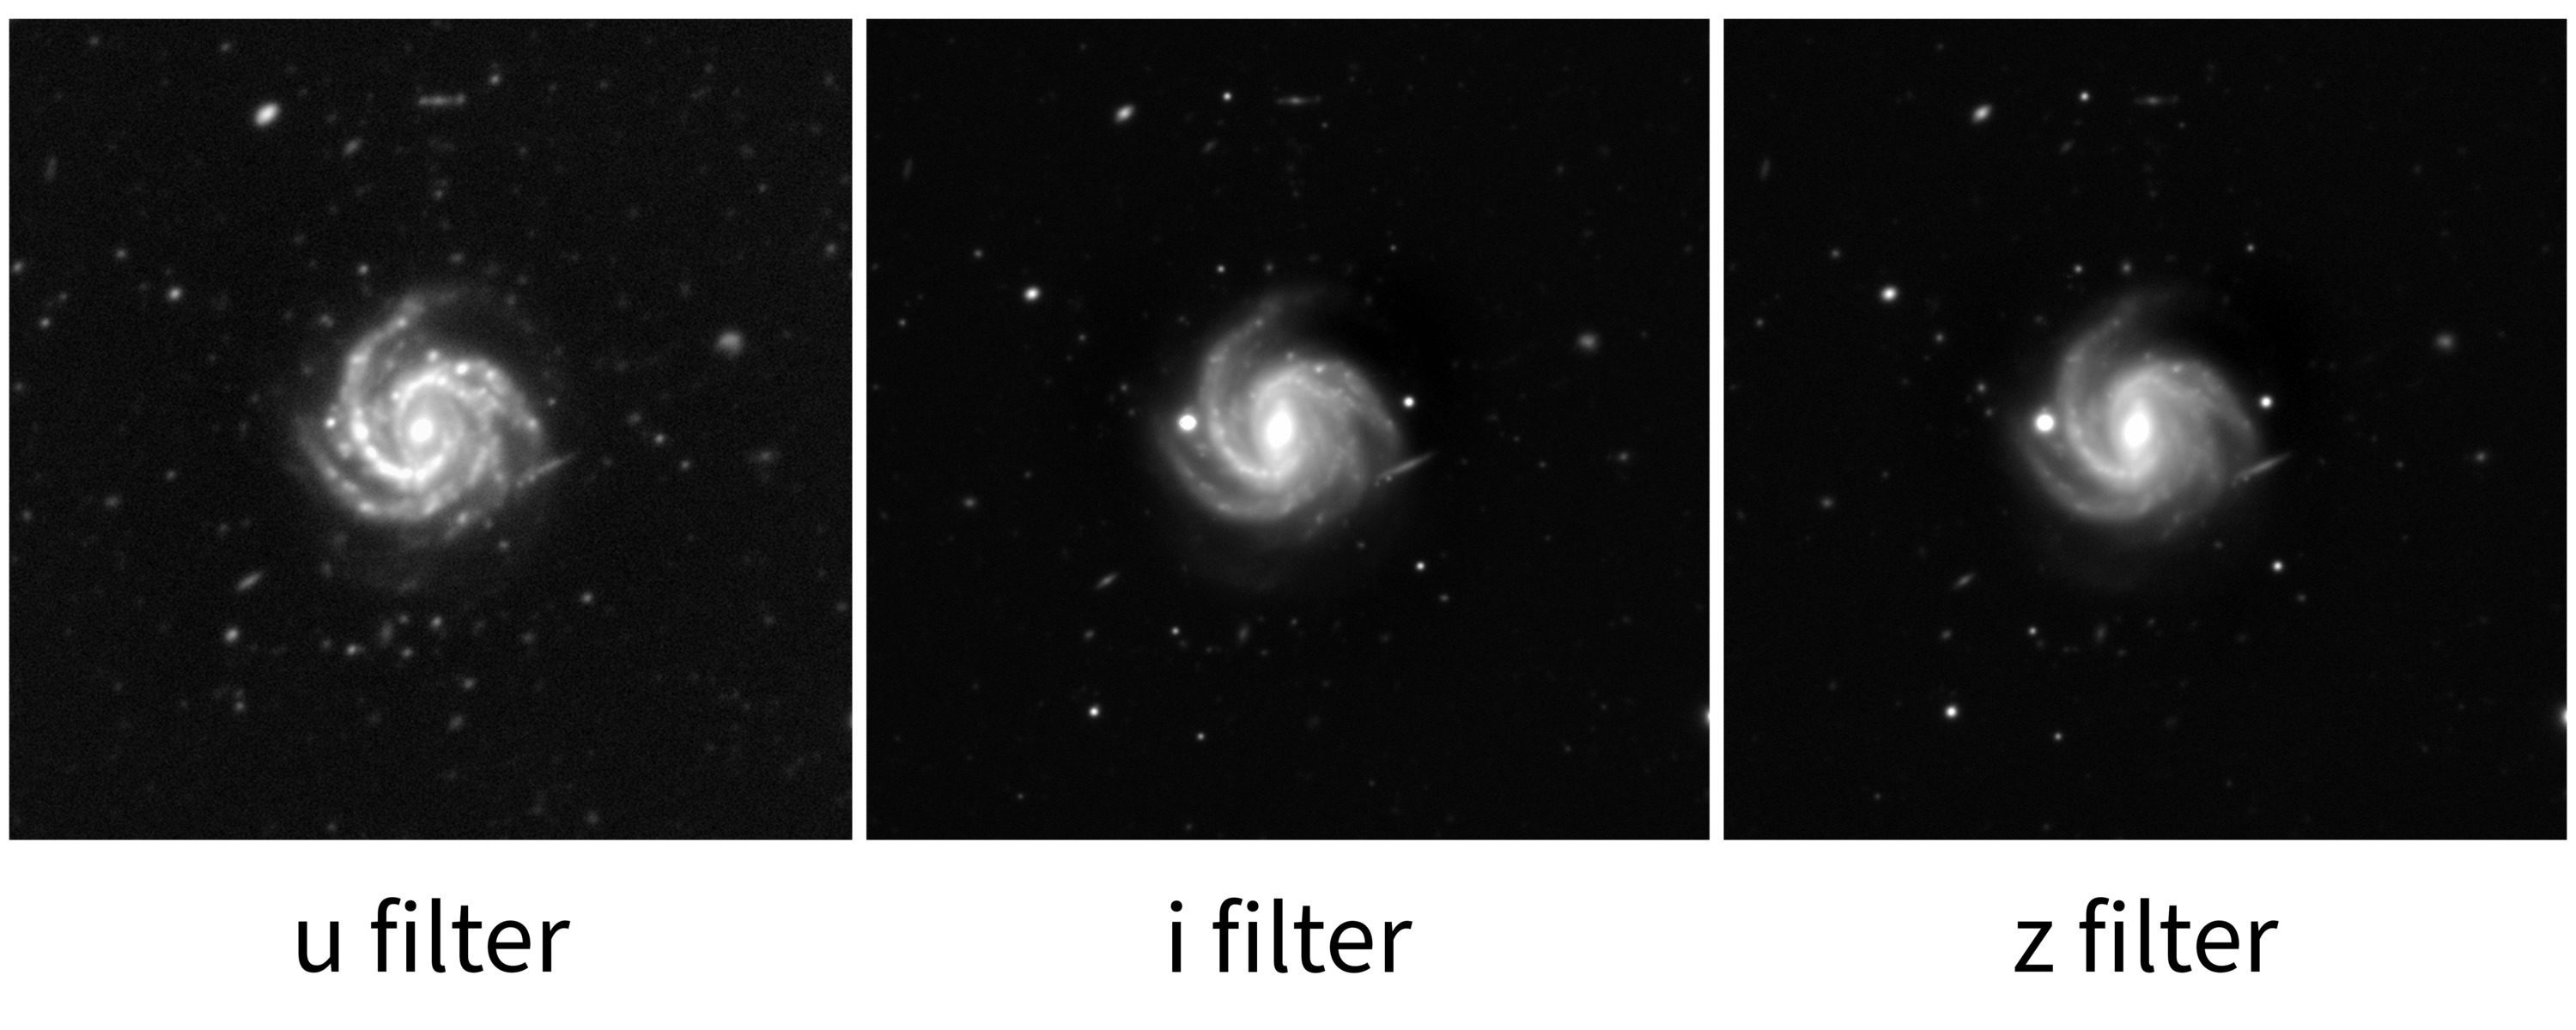 Spiral galaxy image in grayscale u, i, and z filters